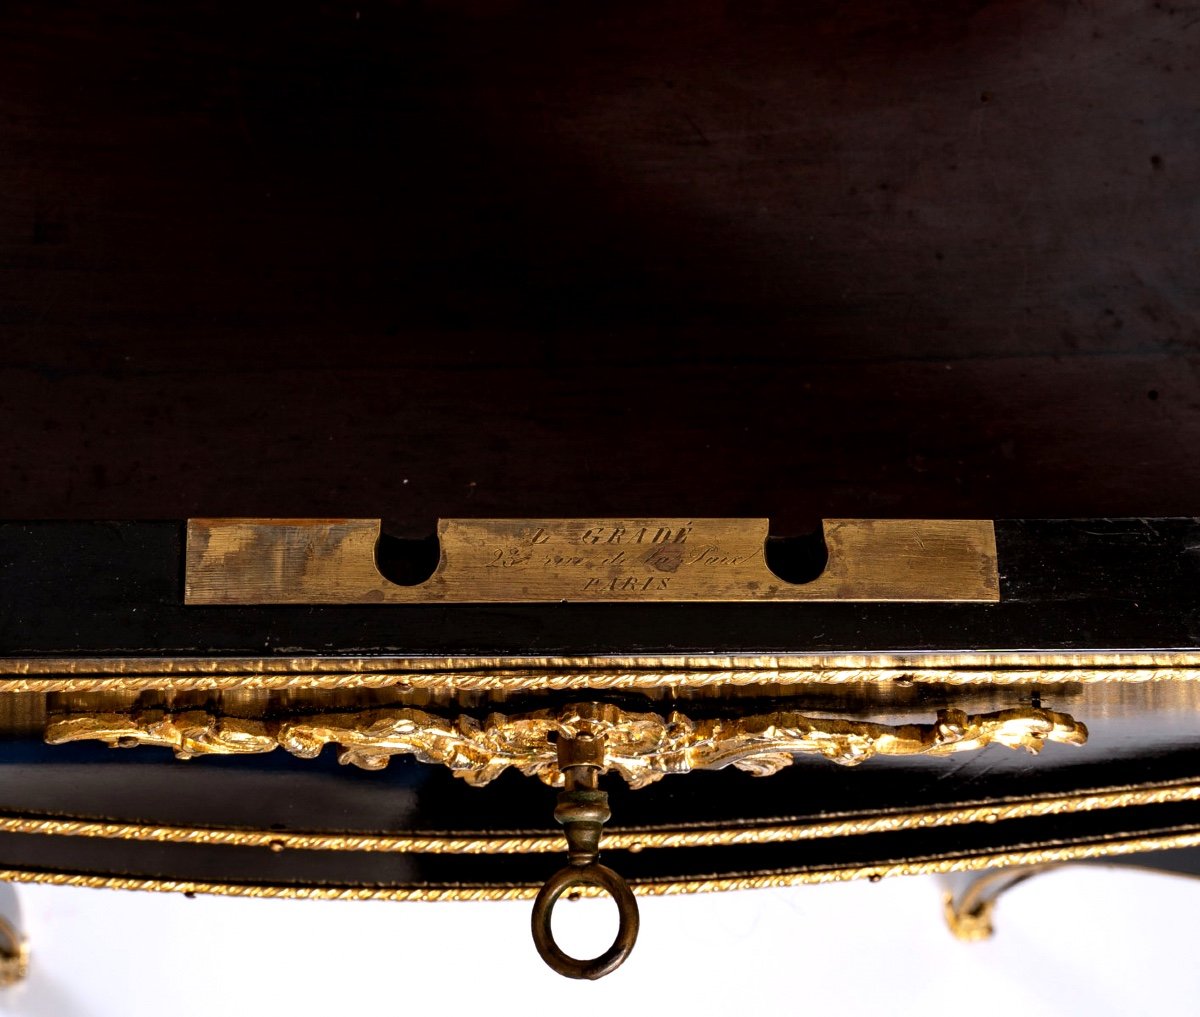 Boulle Work Table - Stamped: L.gradé & Pelcot - Period: XIXth-photo-1